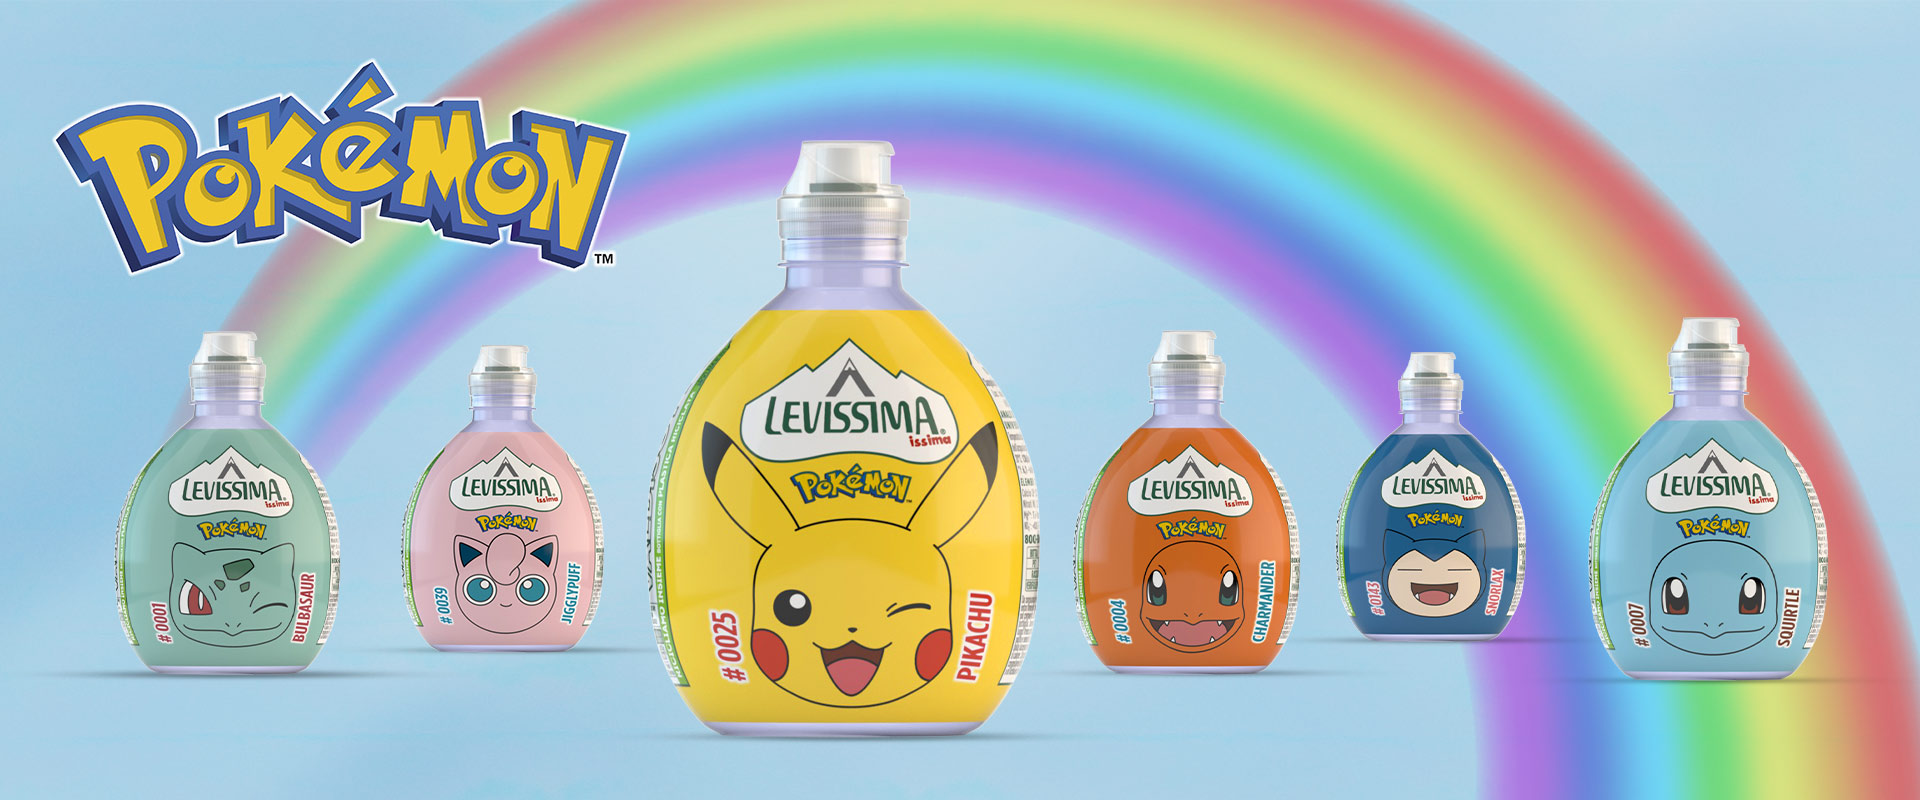 The first release of the Issima Pokémon bottles created by ATC on which the faces of 6 characters, including Pikachu, are portrayed